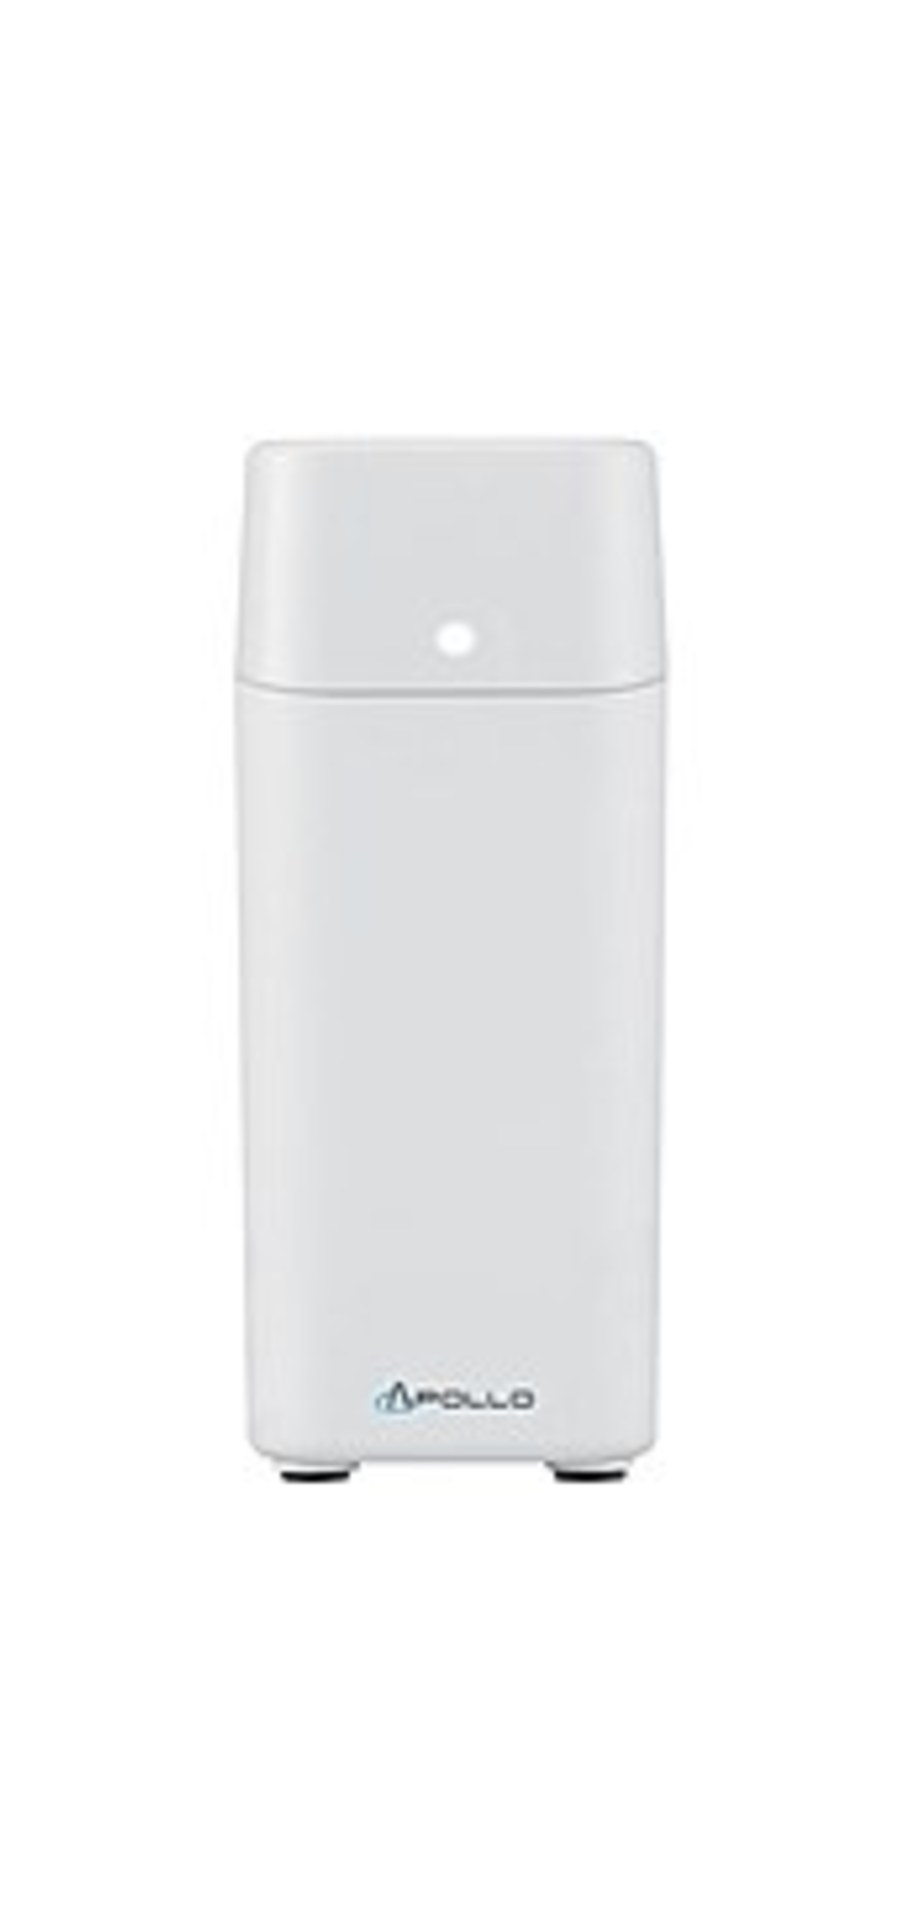 Promise Technology AP1HD2USE 2 TB Apollo Personal Cloud Storage Device - PC Edition - White